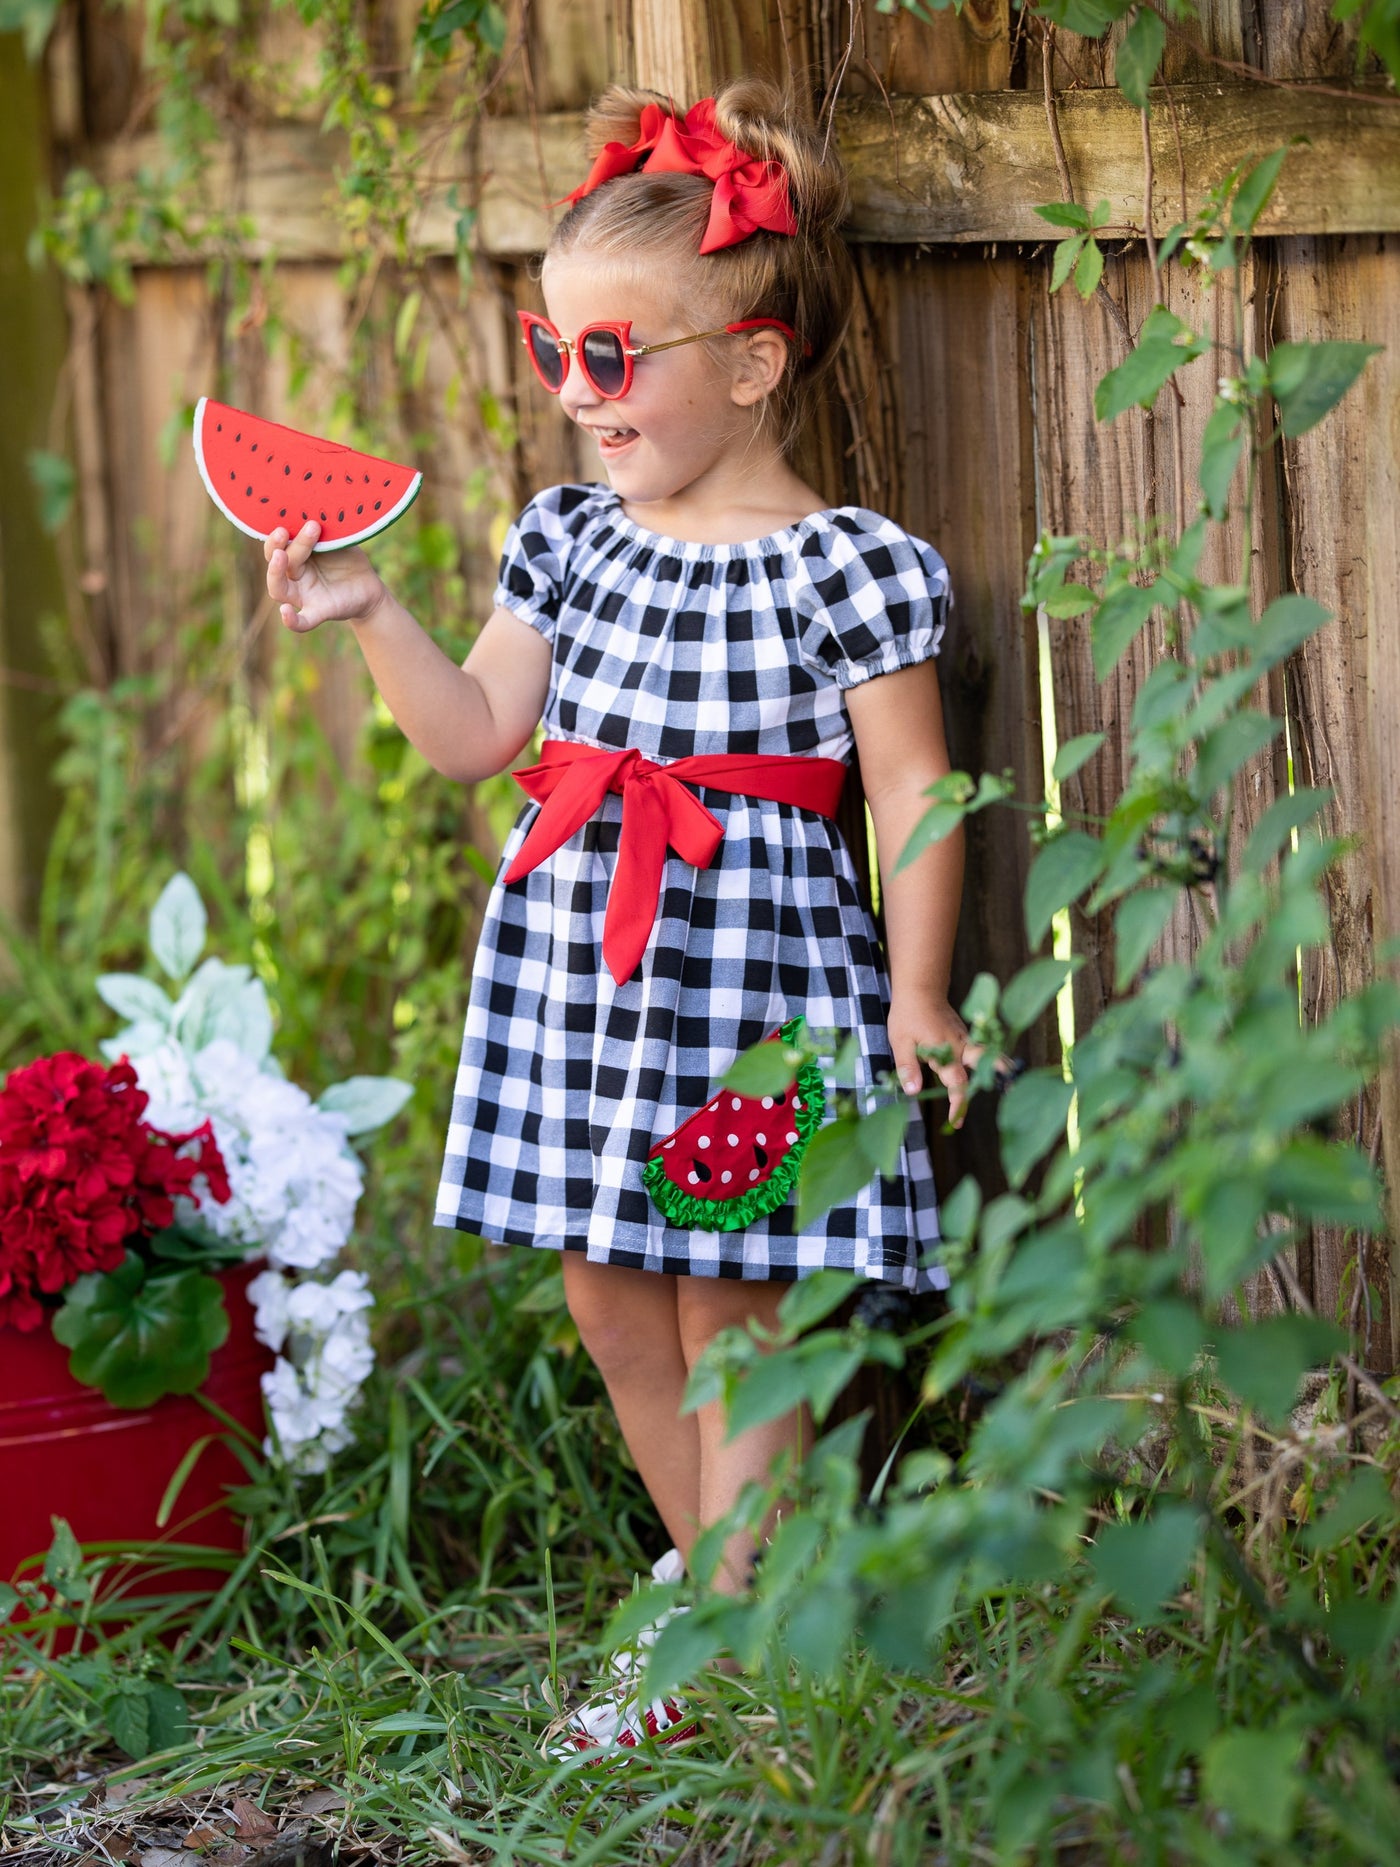 Toddler Spring Dresses | Puff Sleeves Plaid Watermelon Applique Dress